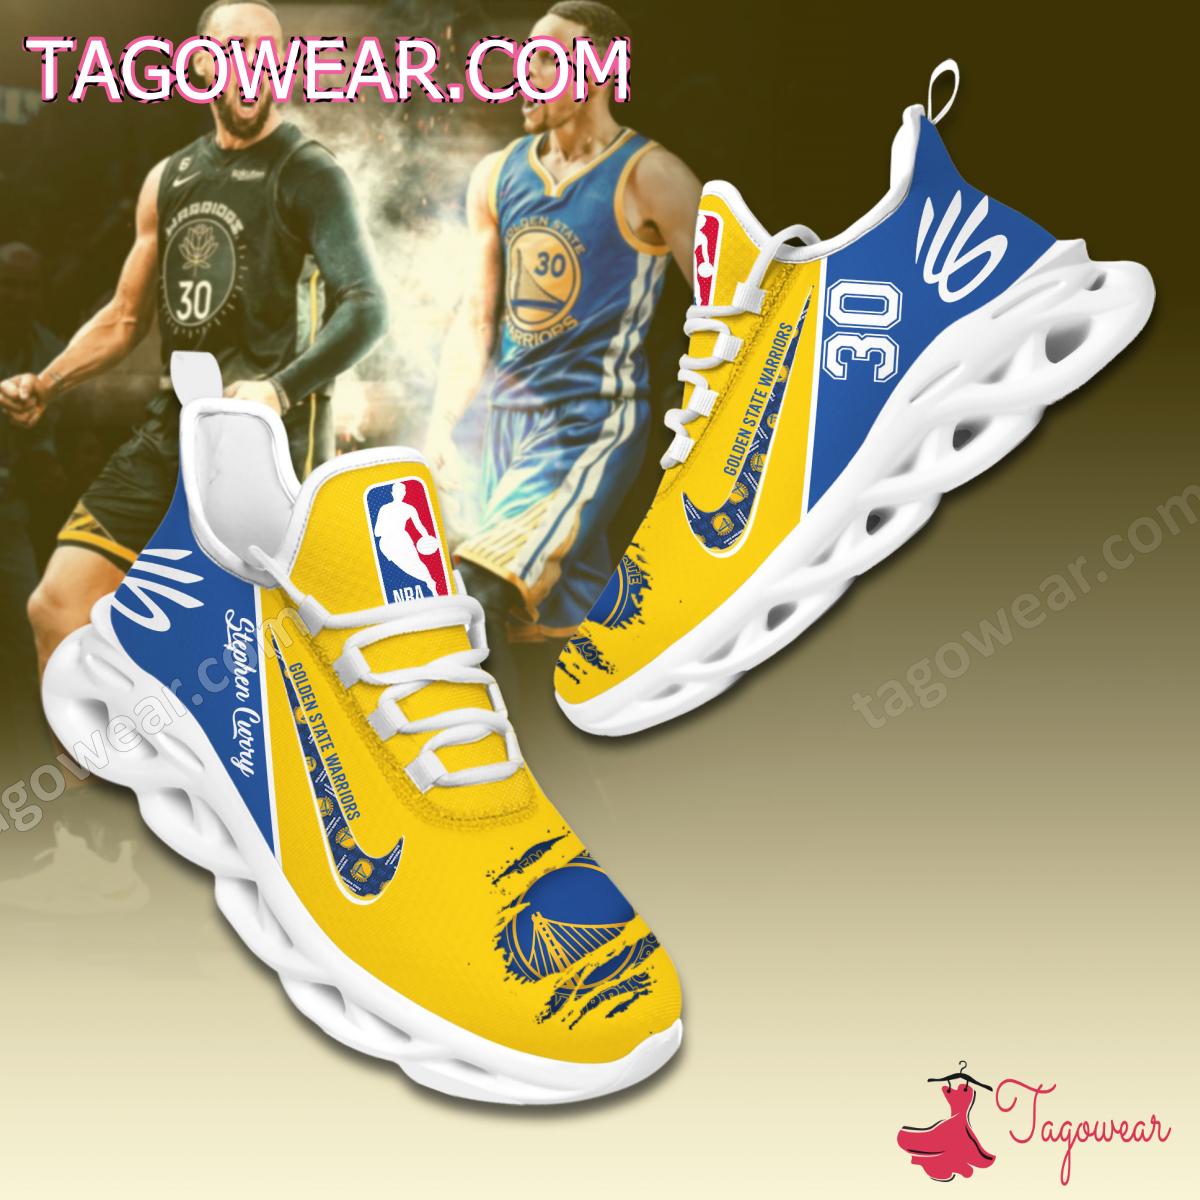 Stephen Curry 30 Golden State Warriors Max Soul Shoes